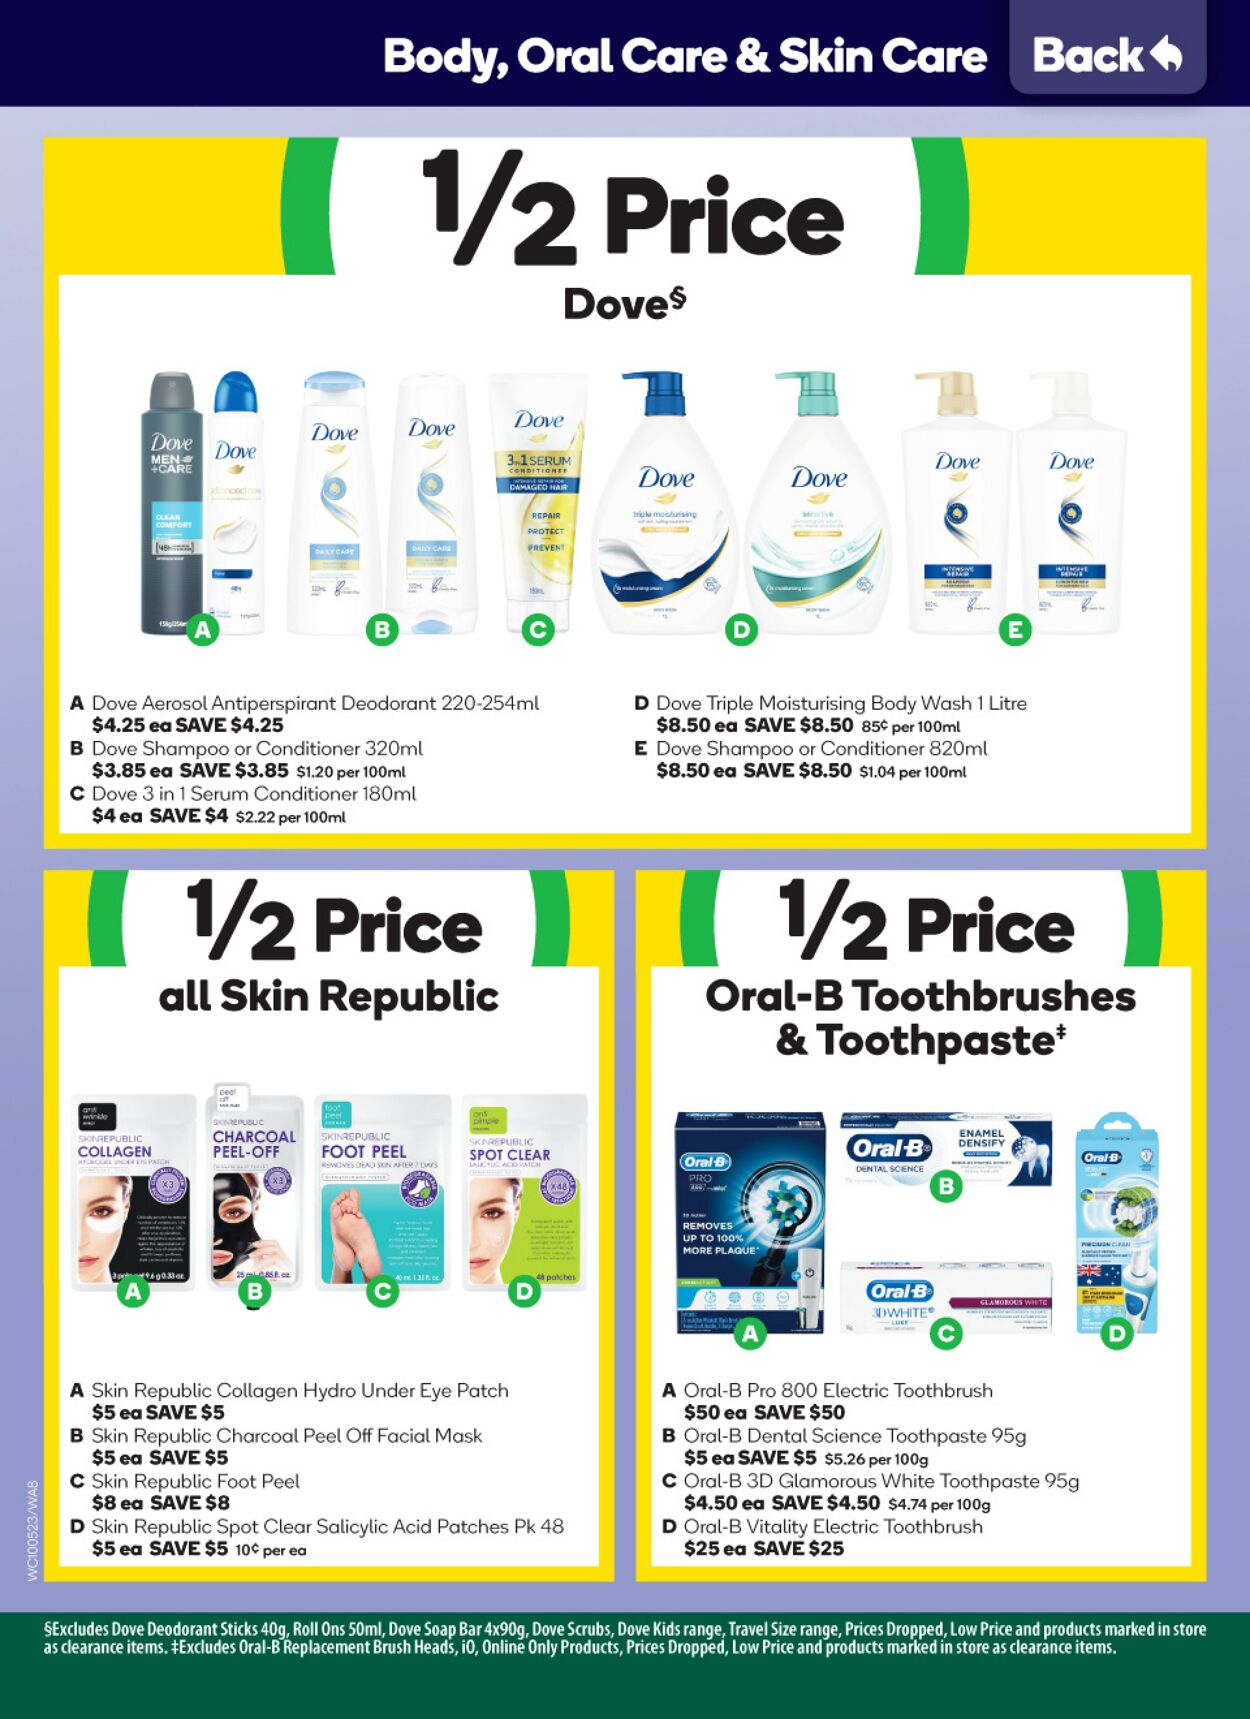 Catalogue Woolworths 10.05.2023 - 16.05.2023